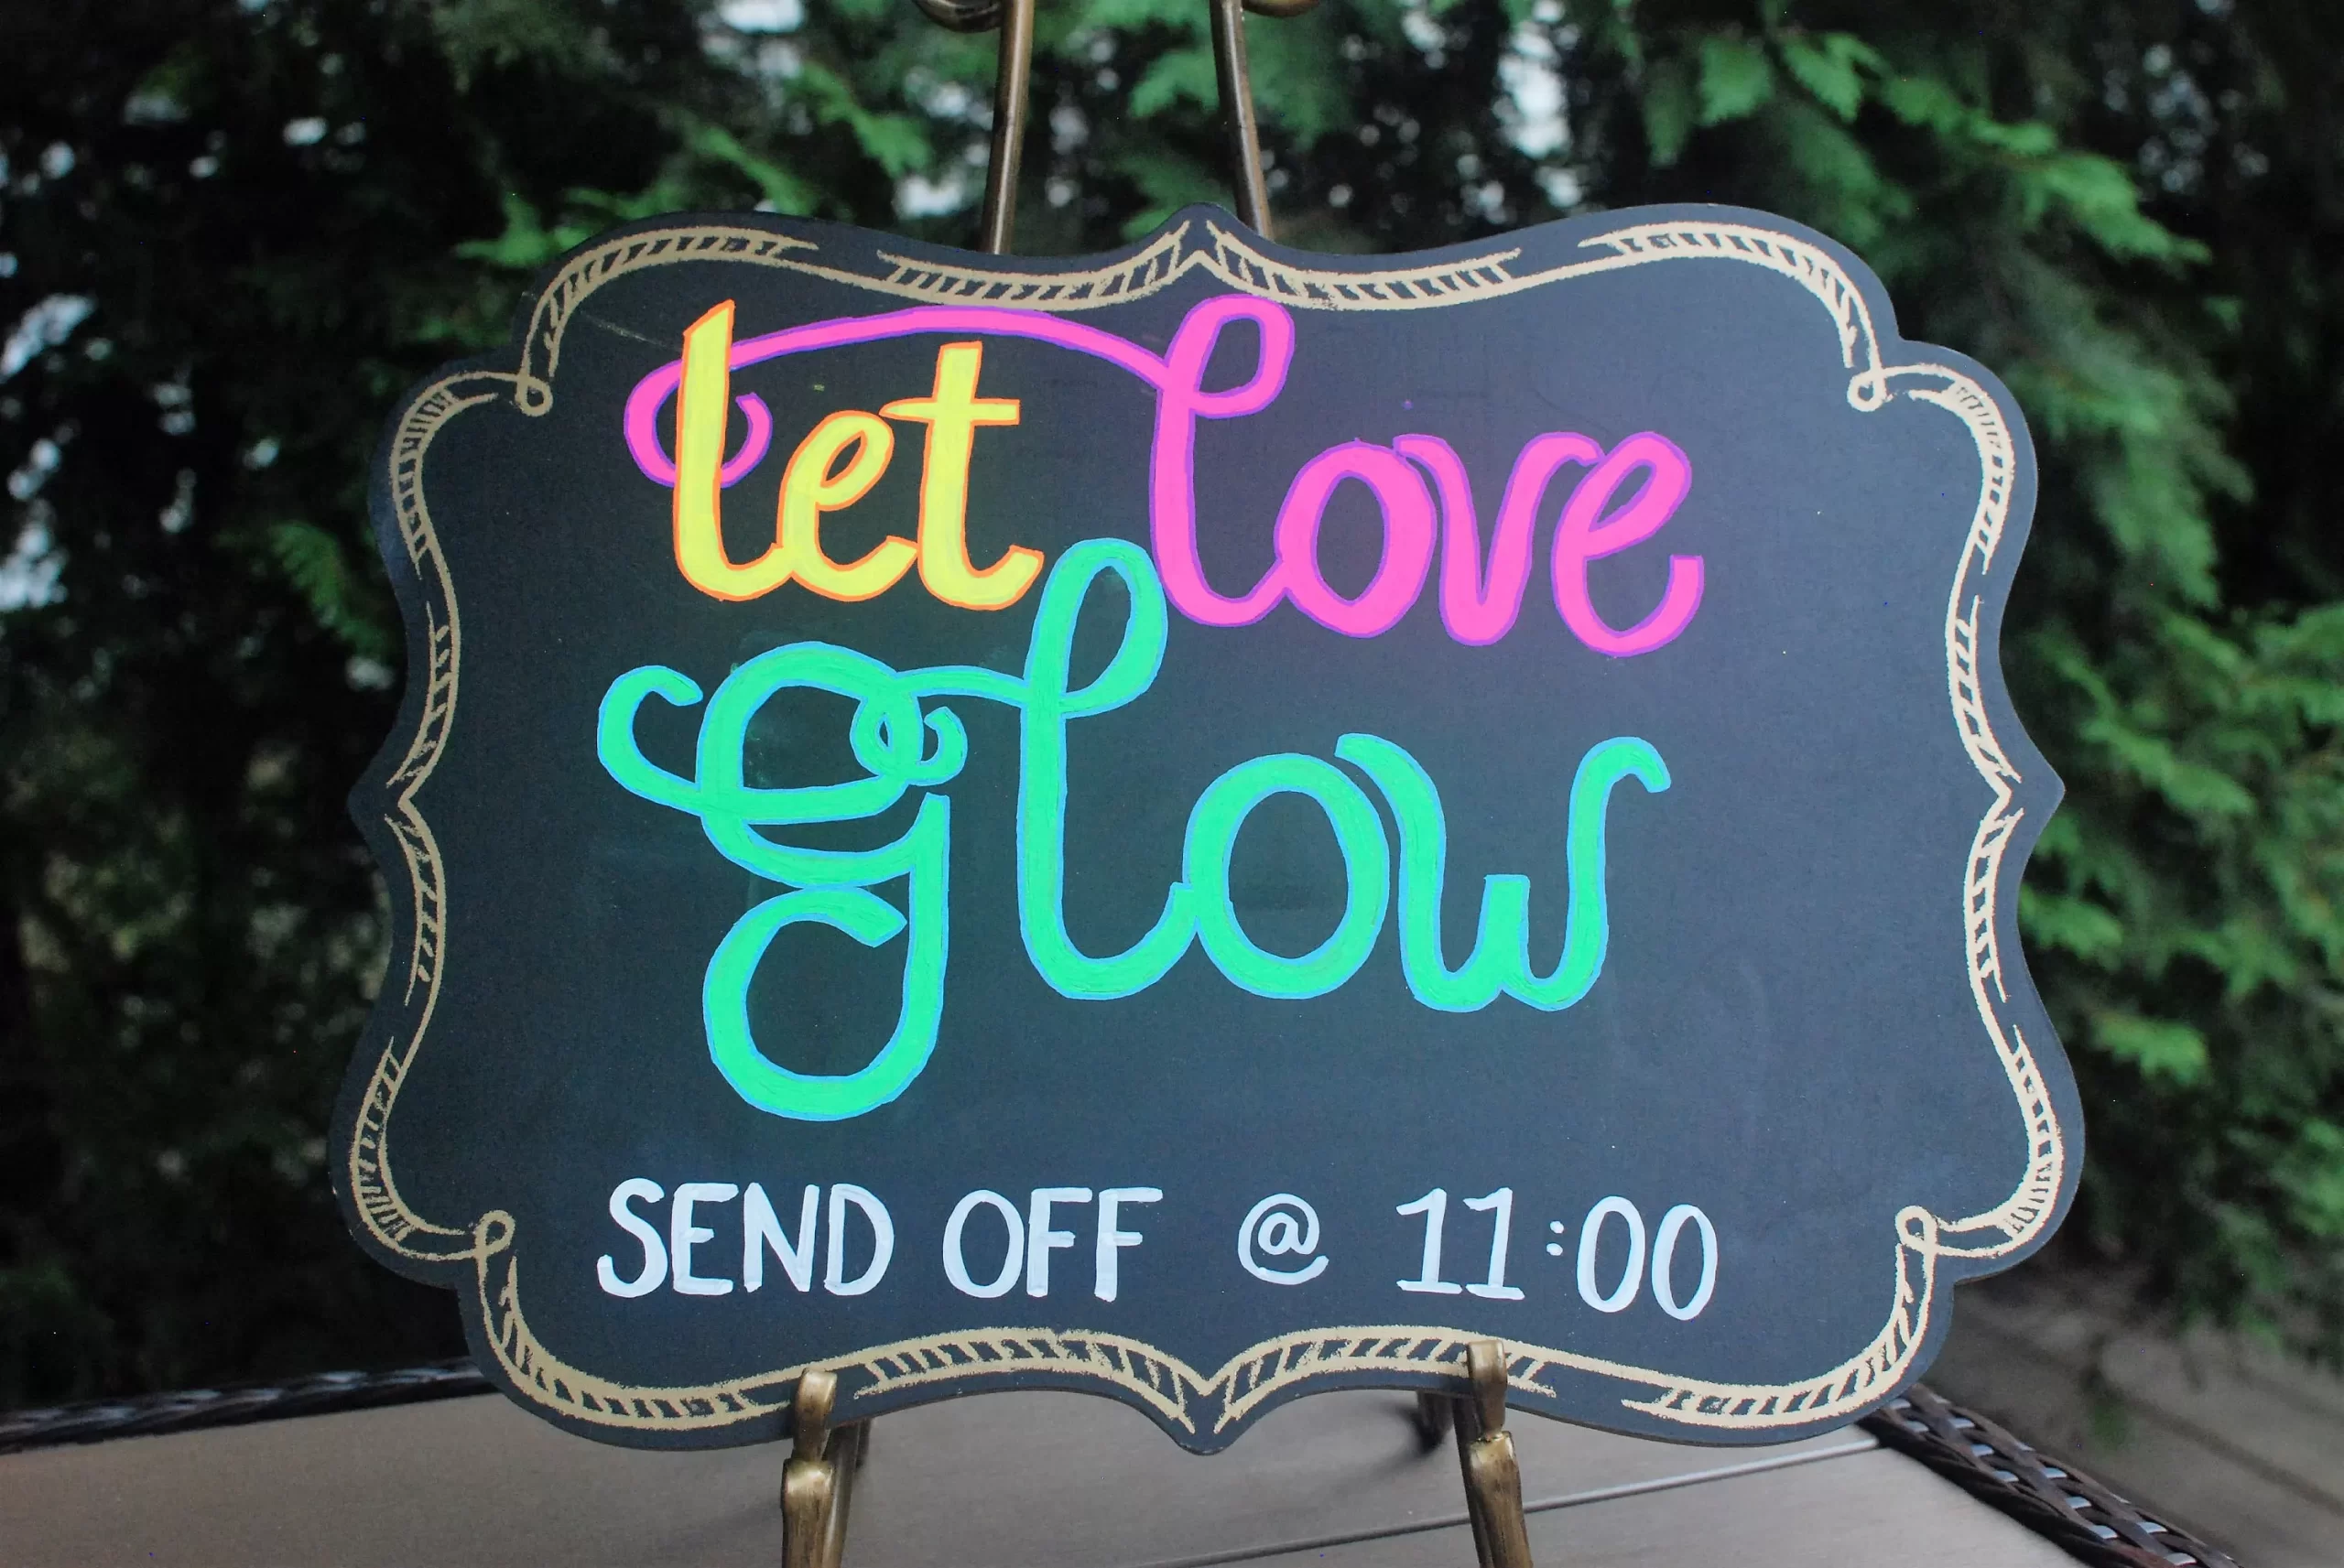 Where to Buy Glow Sticks for Wedding Send Off / Receptions for Cheap